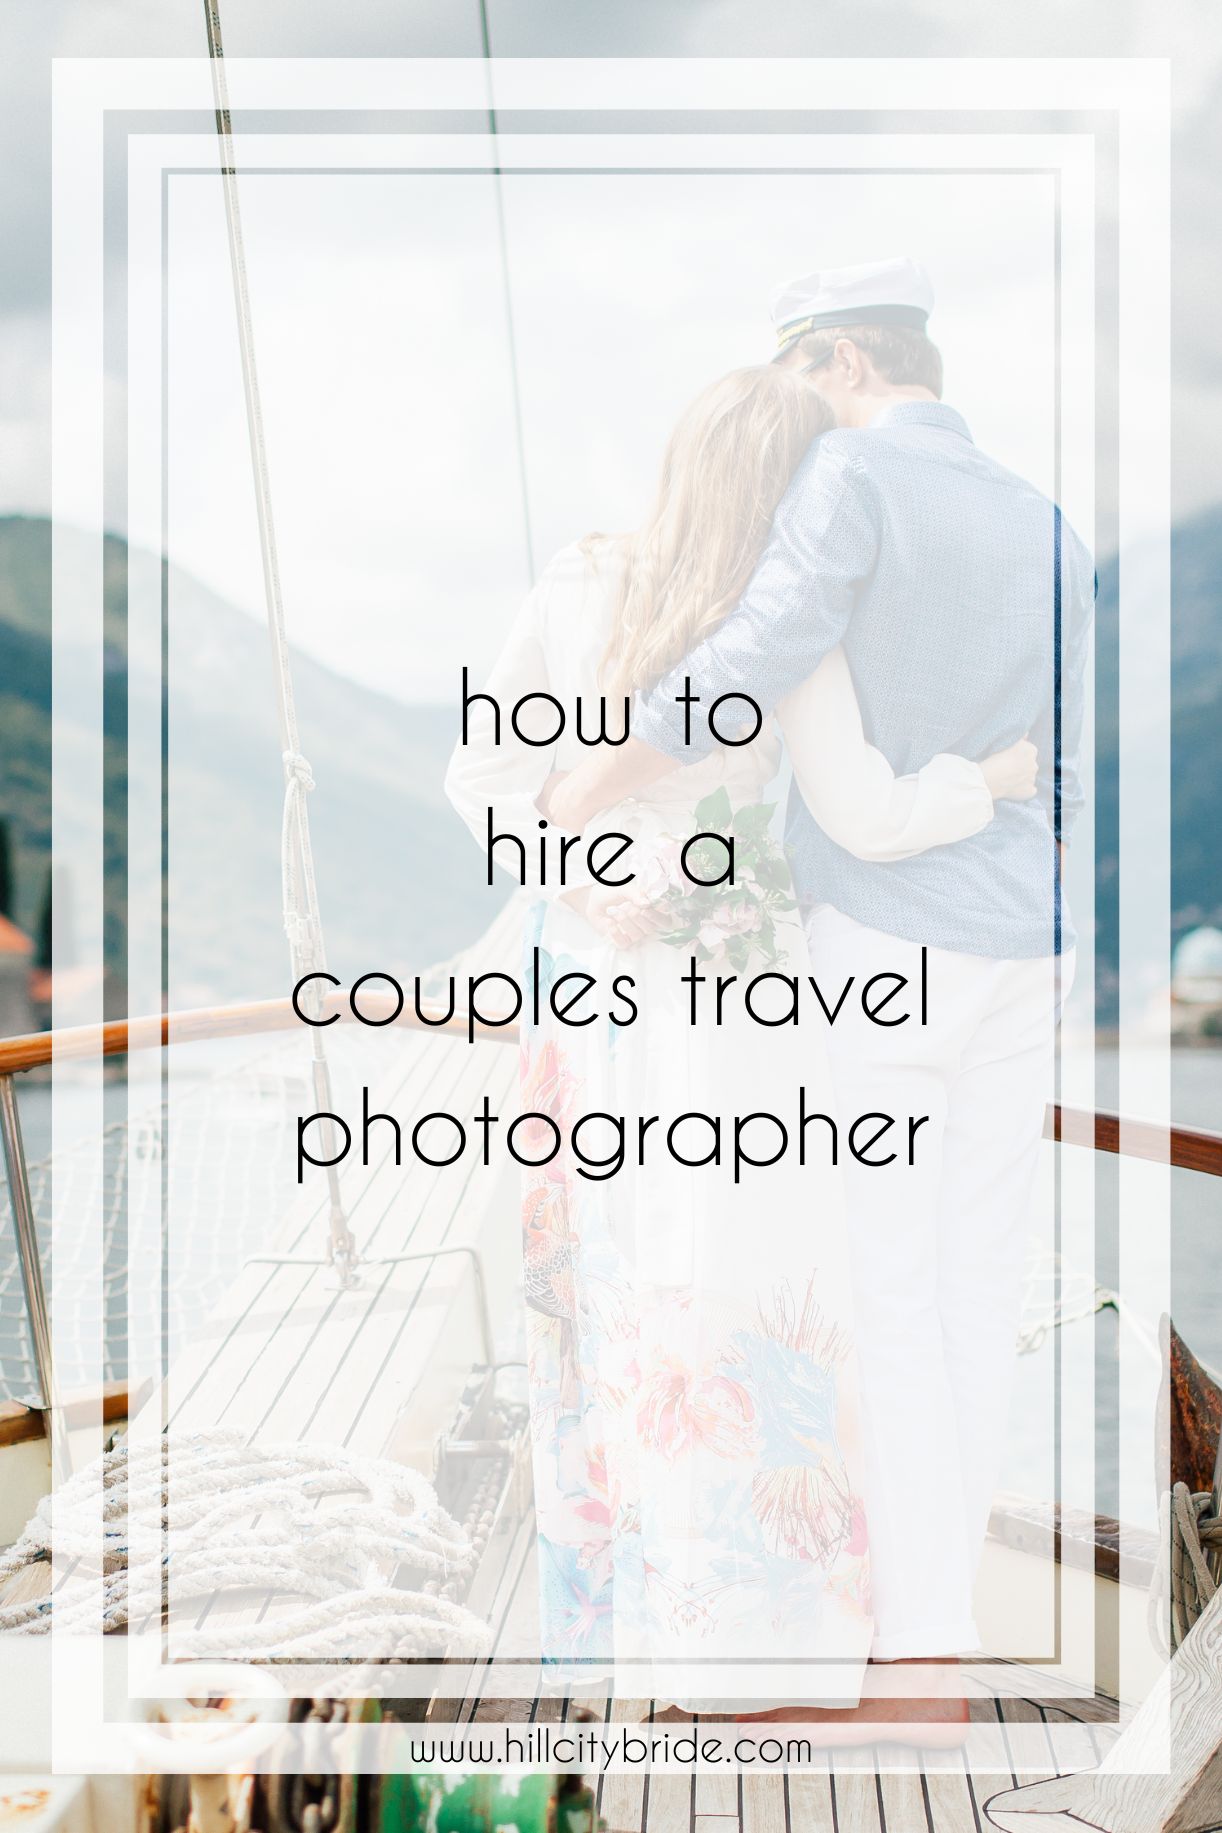 4 Exciting Reasons To Hire A Couples Travel Photographer